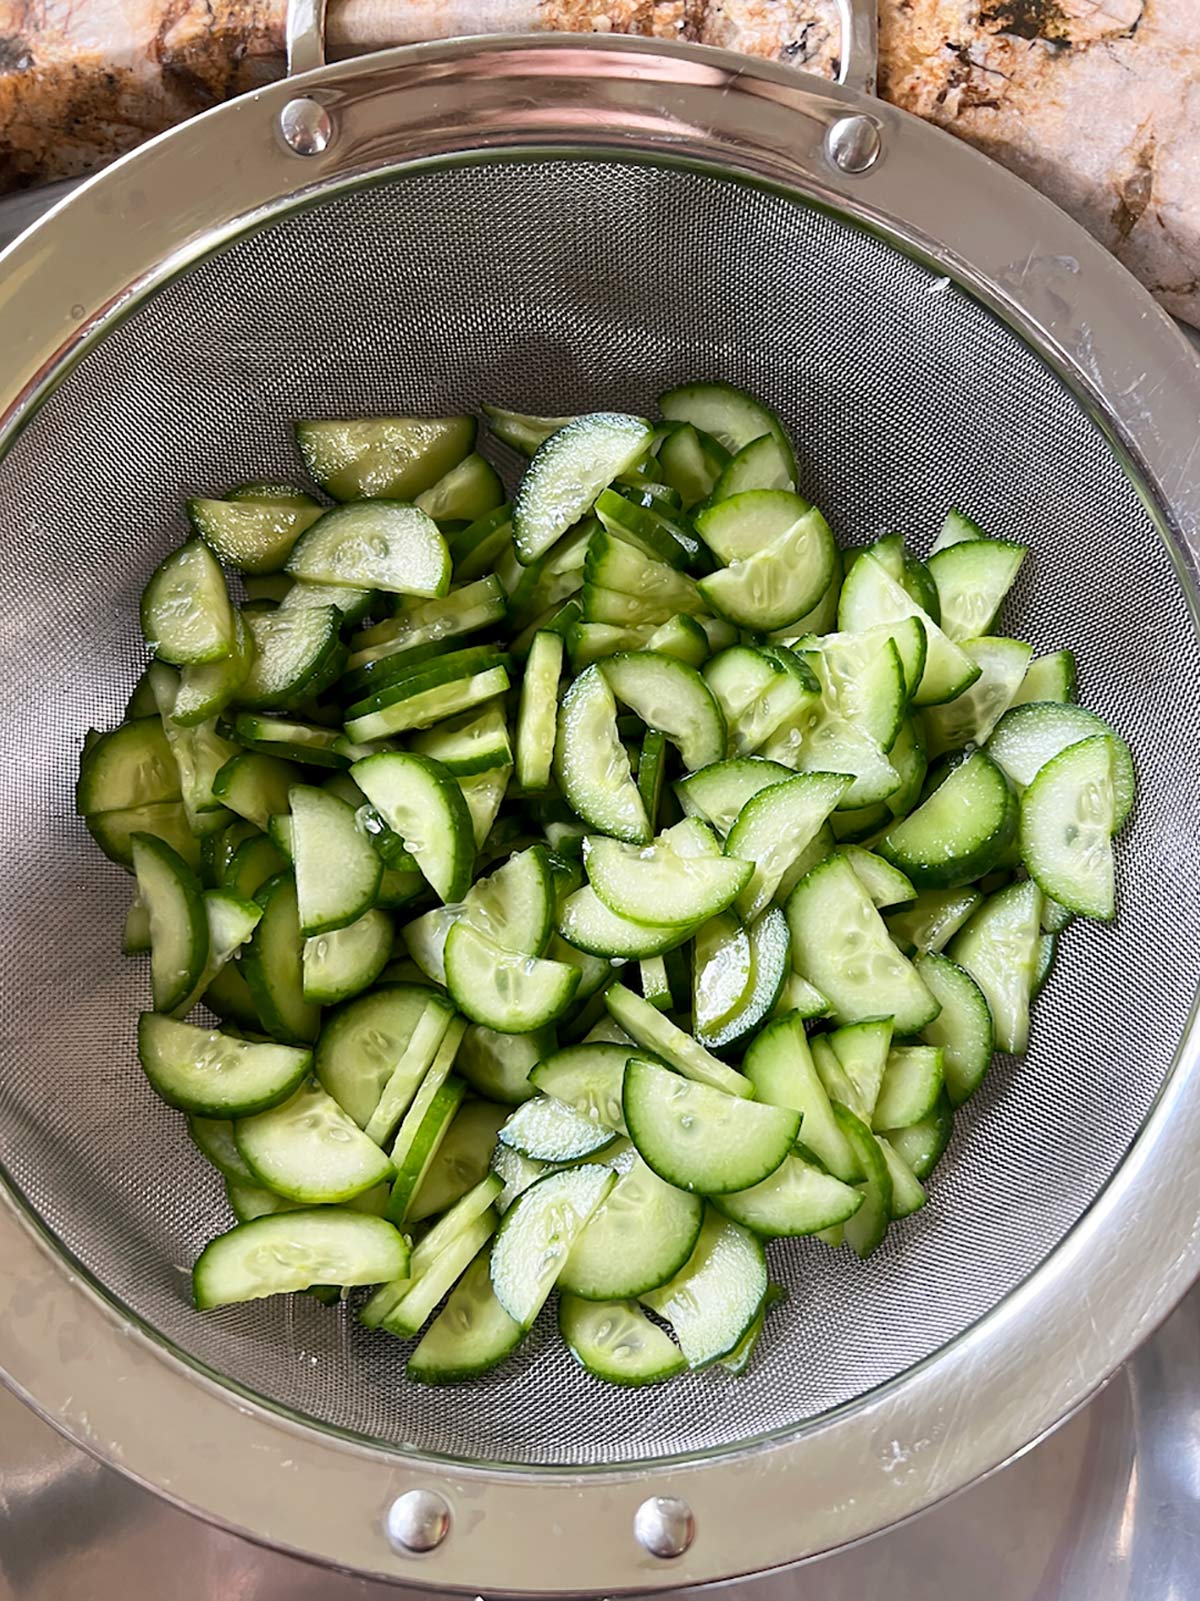 Sliced cucumbers in a strainer over a sink.